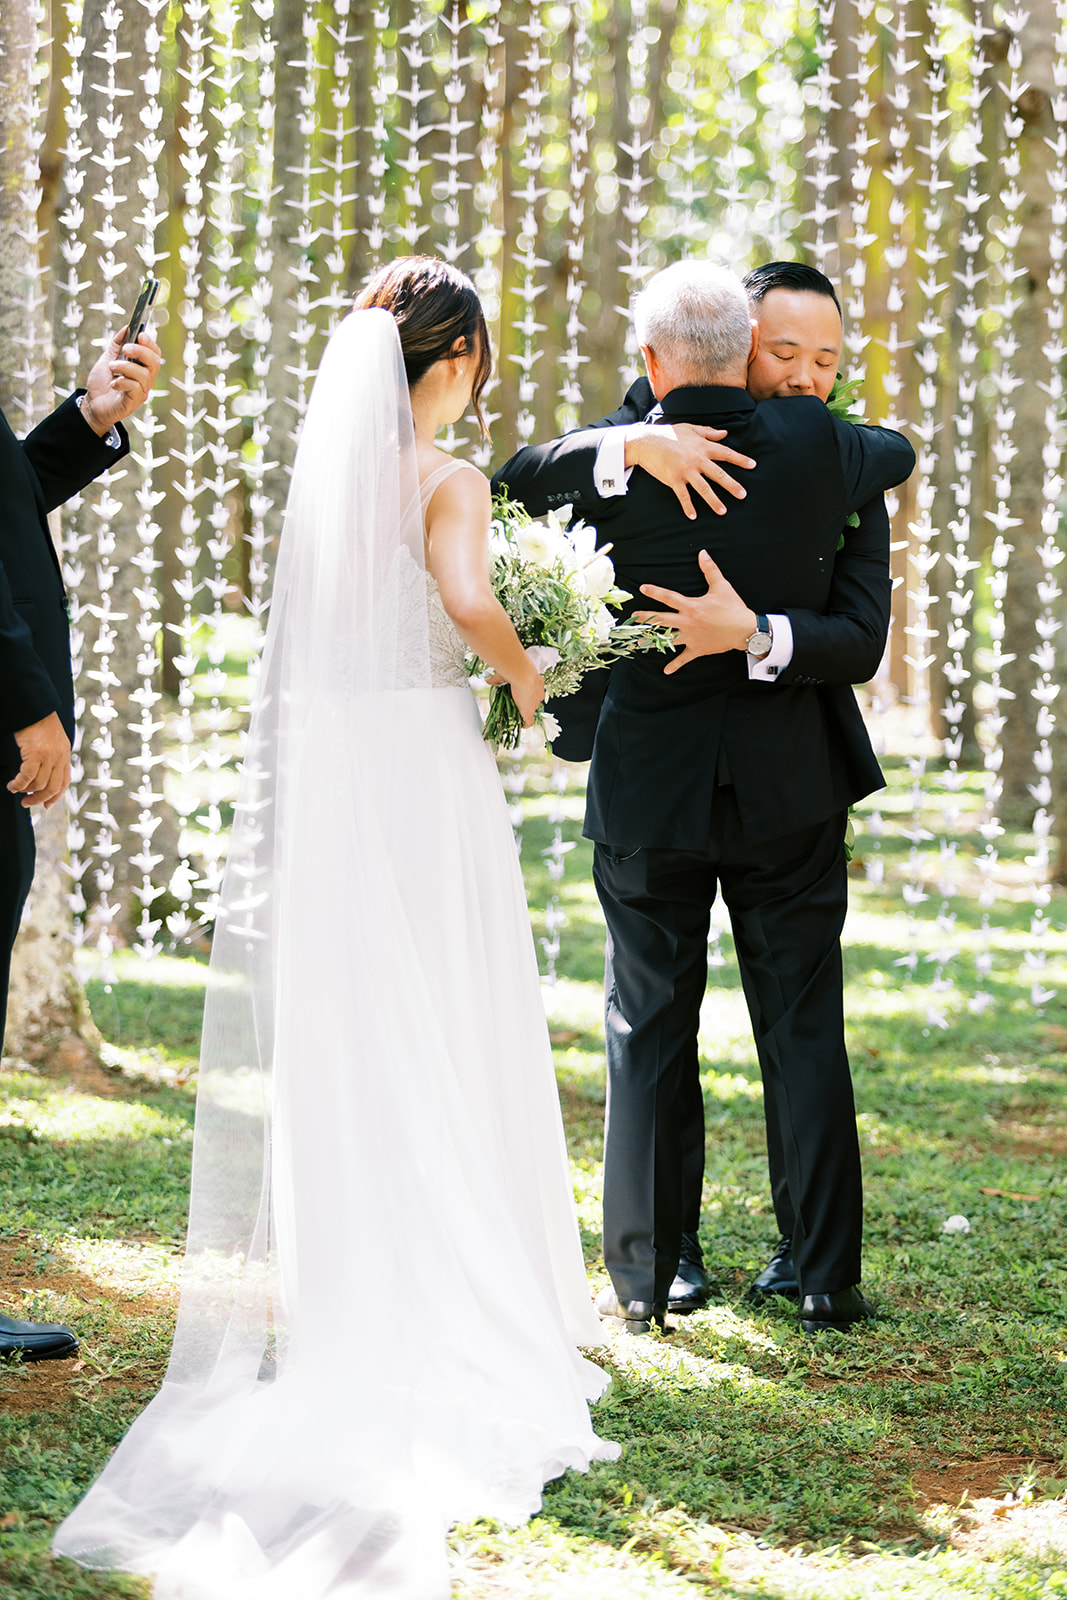 Groom embracingthe bride's father during their Oahu Wedding ceremony captured by Oahu Wedding Photographer